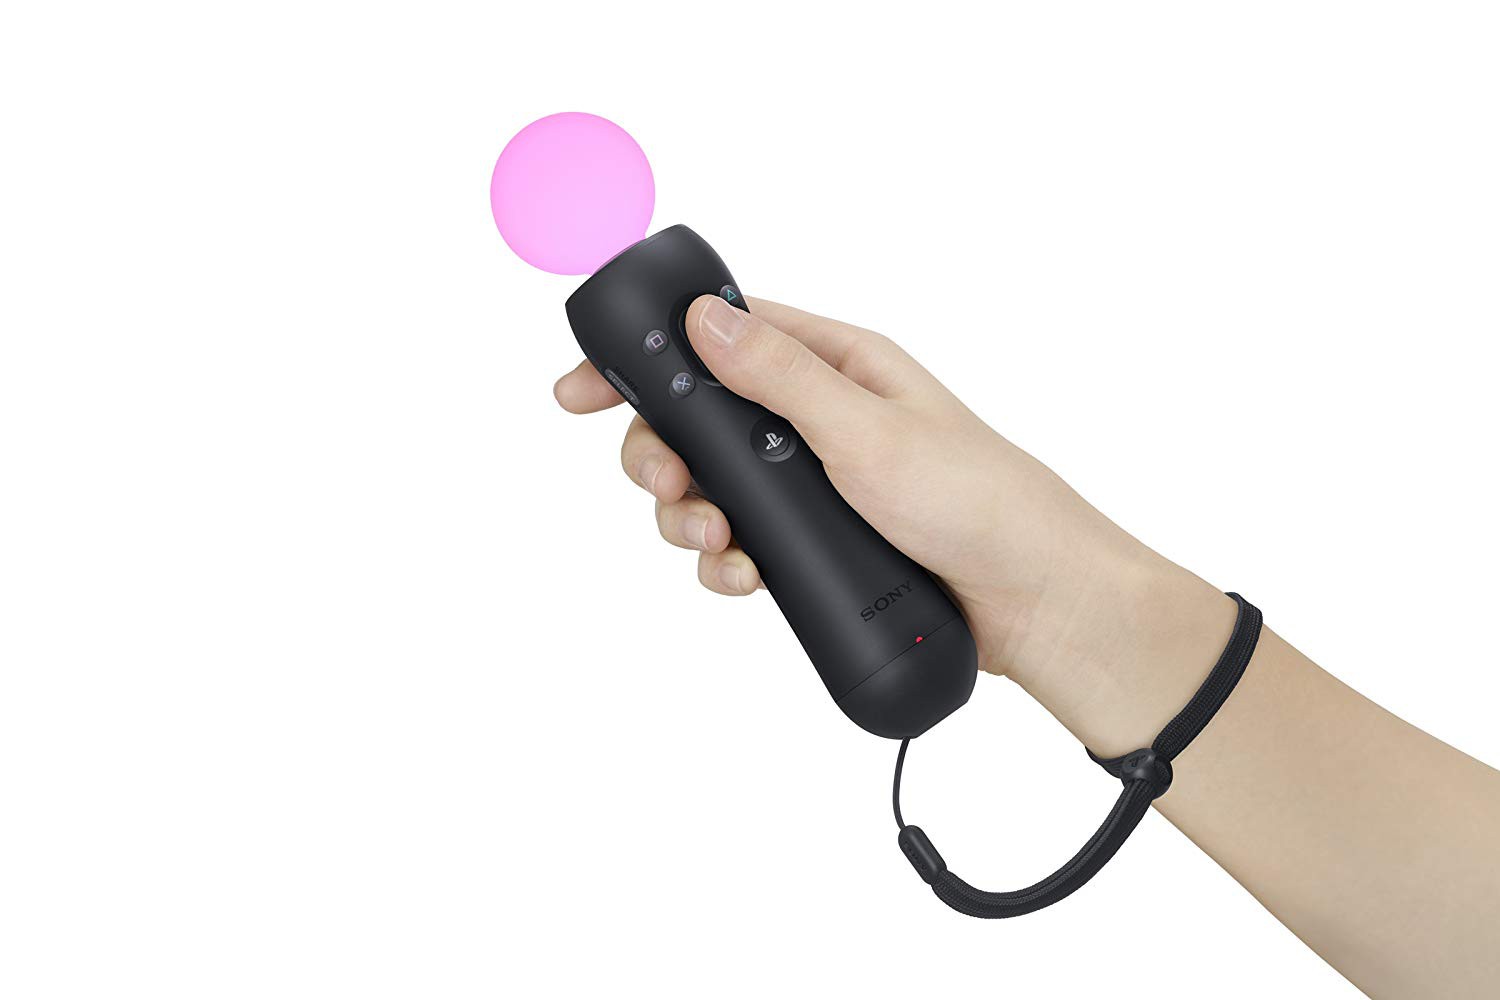 Sony PlayStation Move Motion Controller - Twin Pack